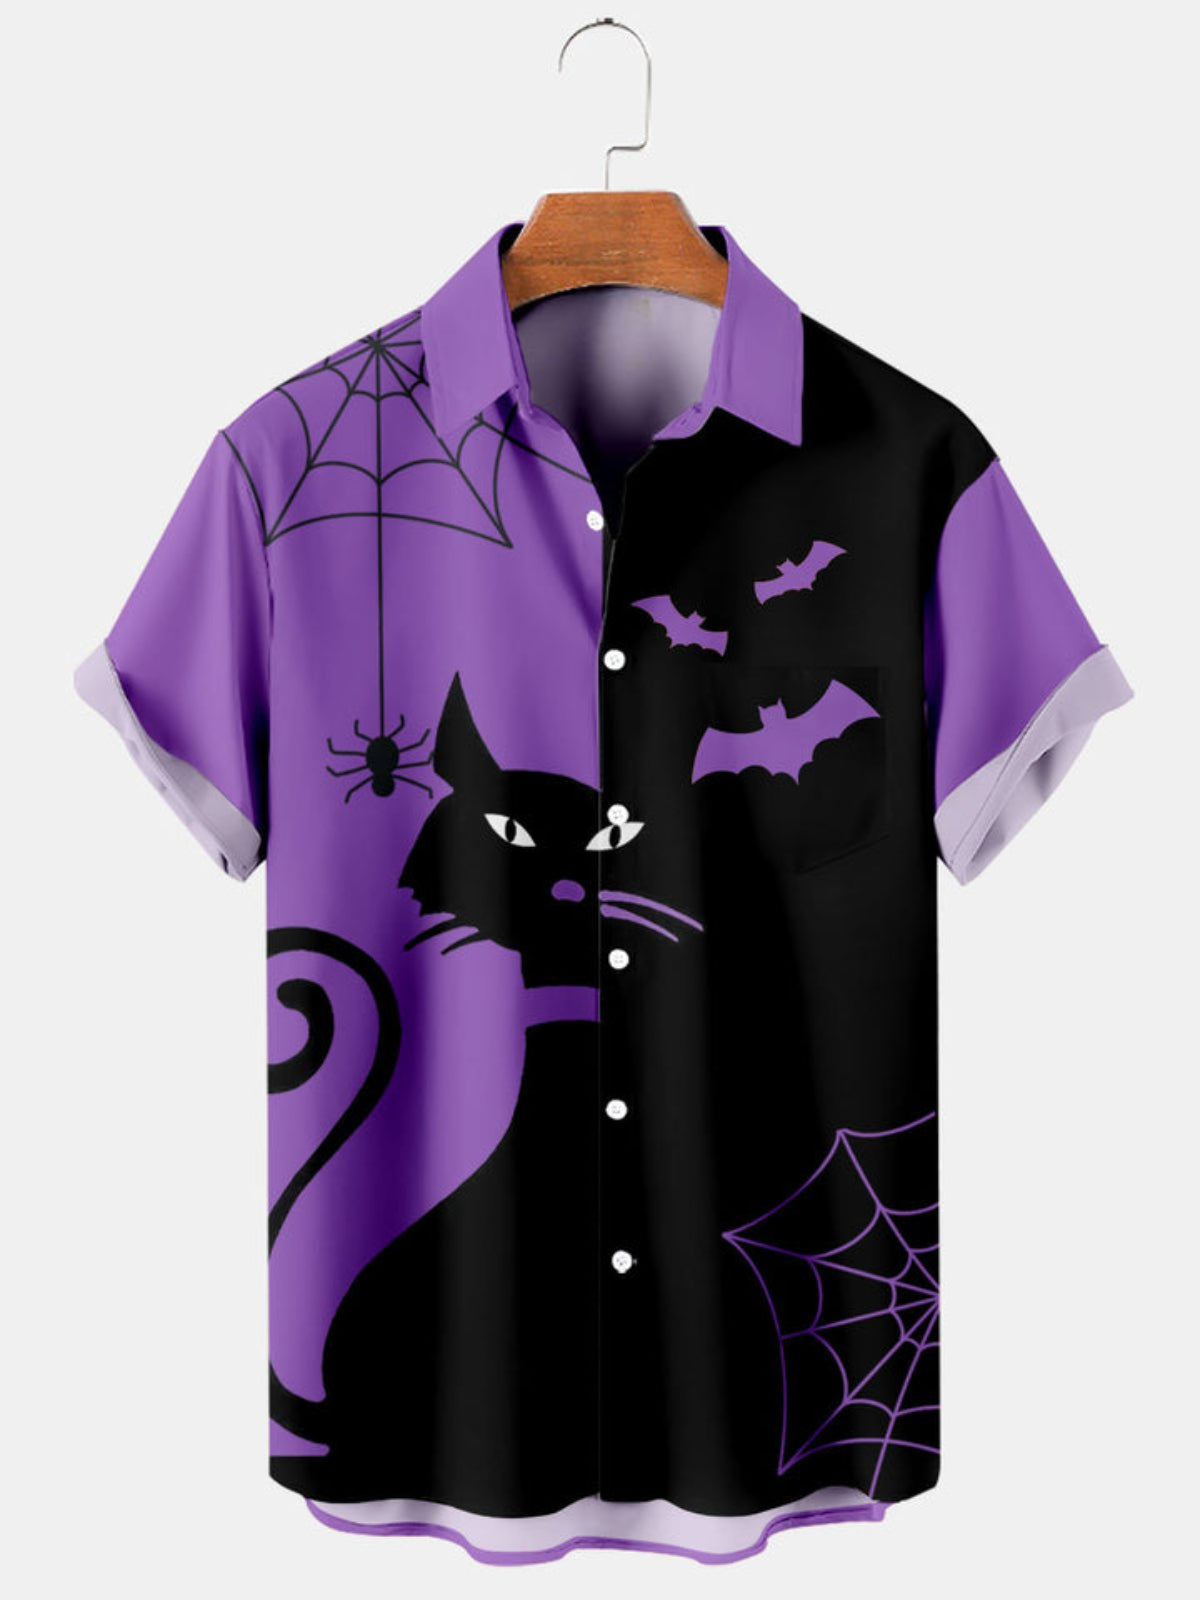 Cat And Spider Short Sleeve Shirt